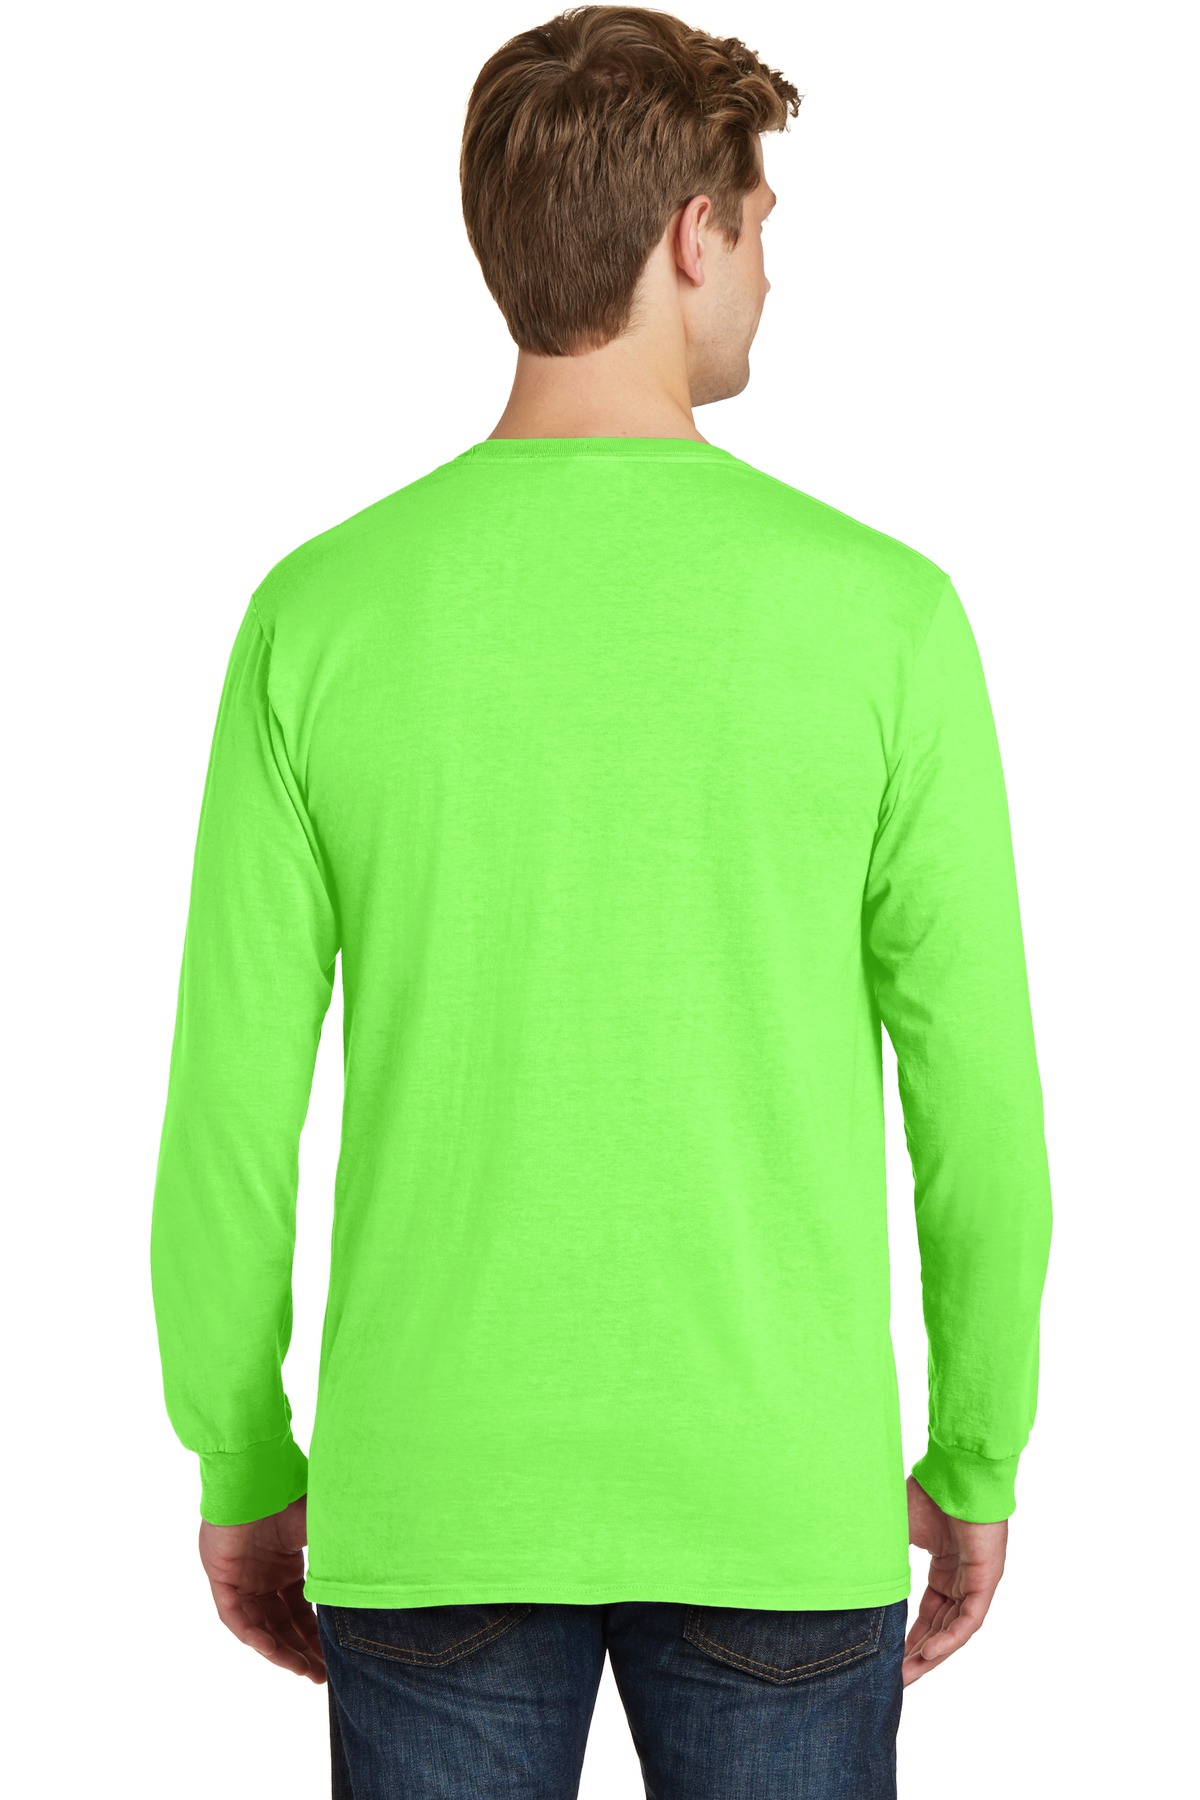 Port & Company Pigment Dyed Long Sleeve Pocket Tee-M (Neon Green) - image 2 of 6